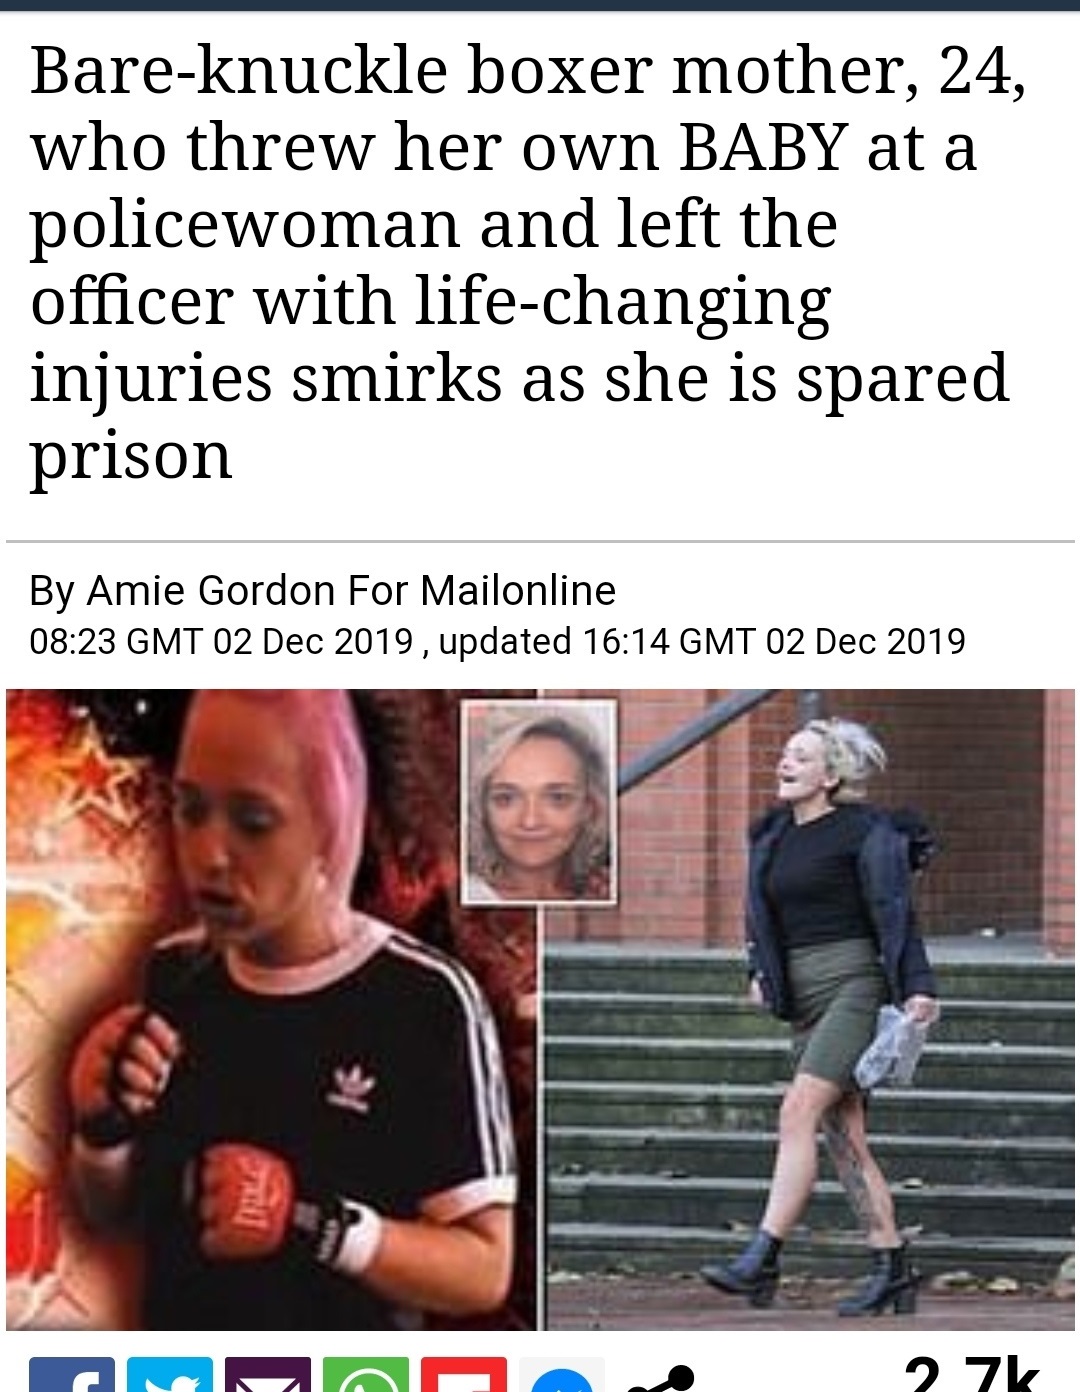 photo caption - Bareknuckle boxer mother, 24, who threw her own Baby at a policewoman and left the officer with lifechanging injuries smirks as she is spared prison By Amie Gordon For Mailonline Gmt , updated Gmt Nu 27k